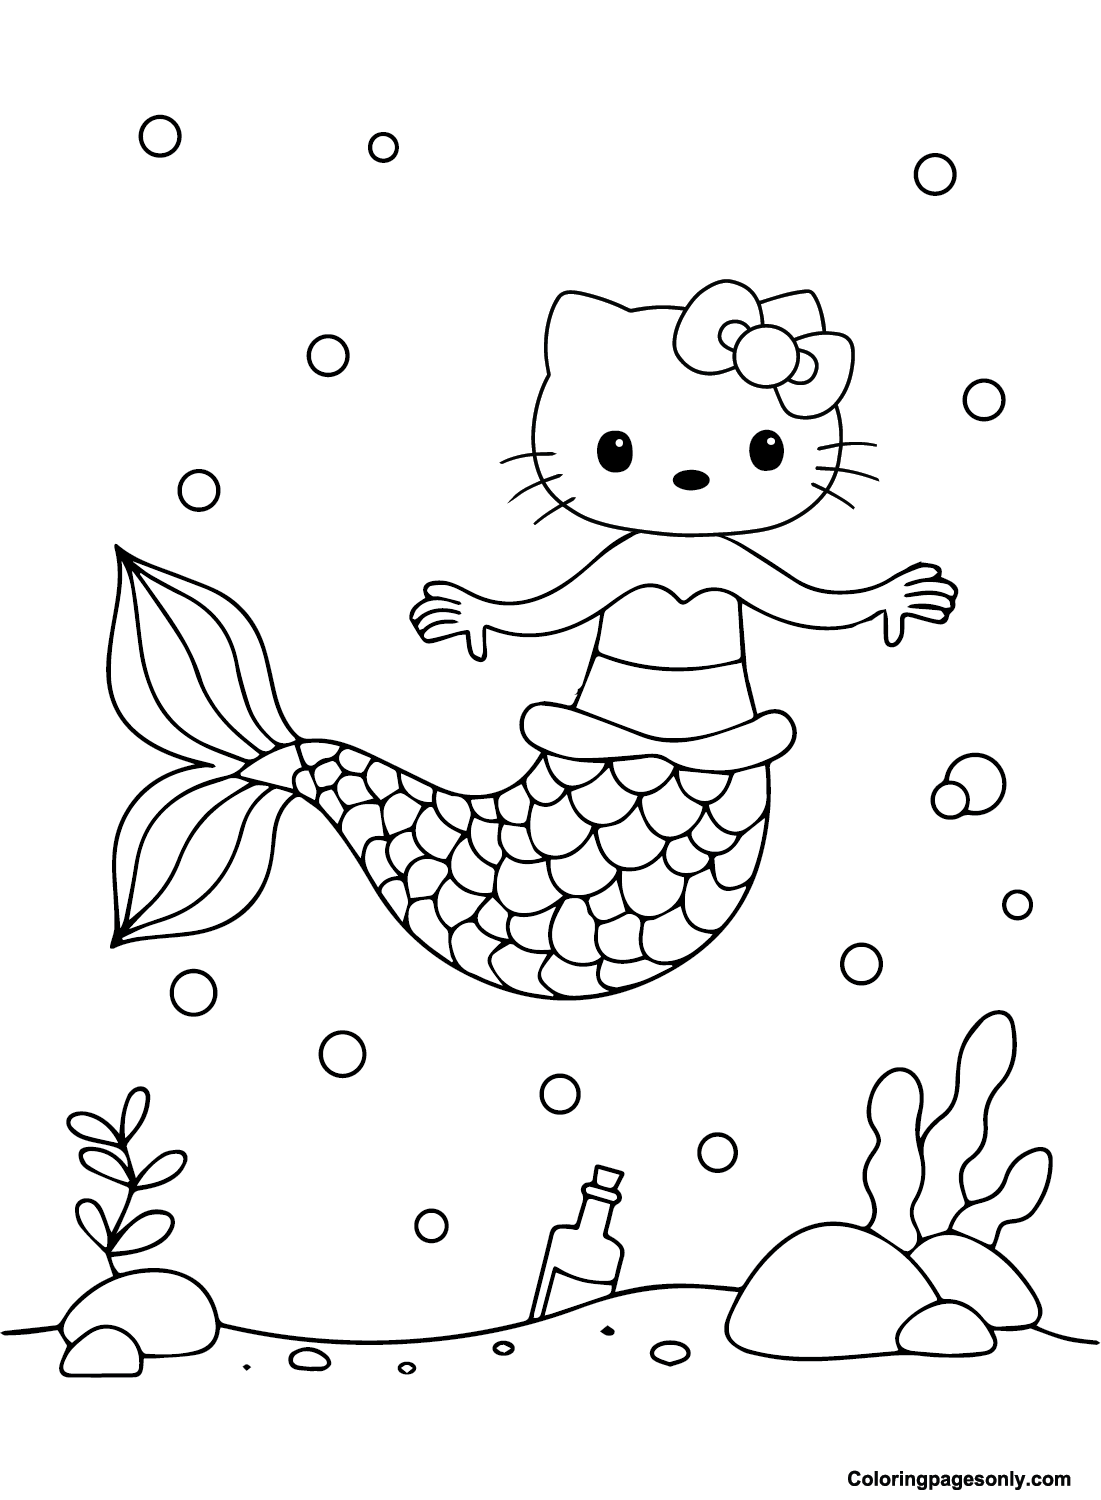 Bobbie Goods  Hello kitty colouring pages, Bear coloring pages, Detailed  coloring pages